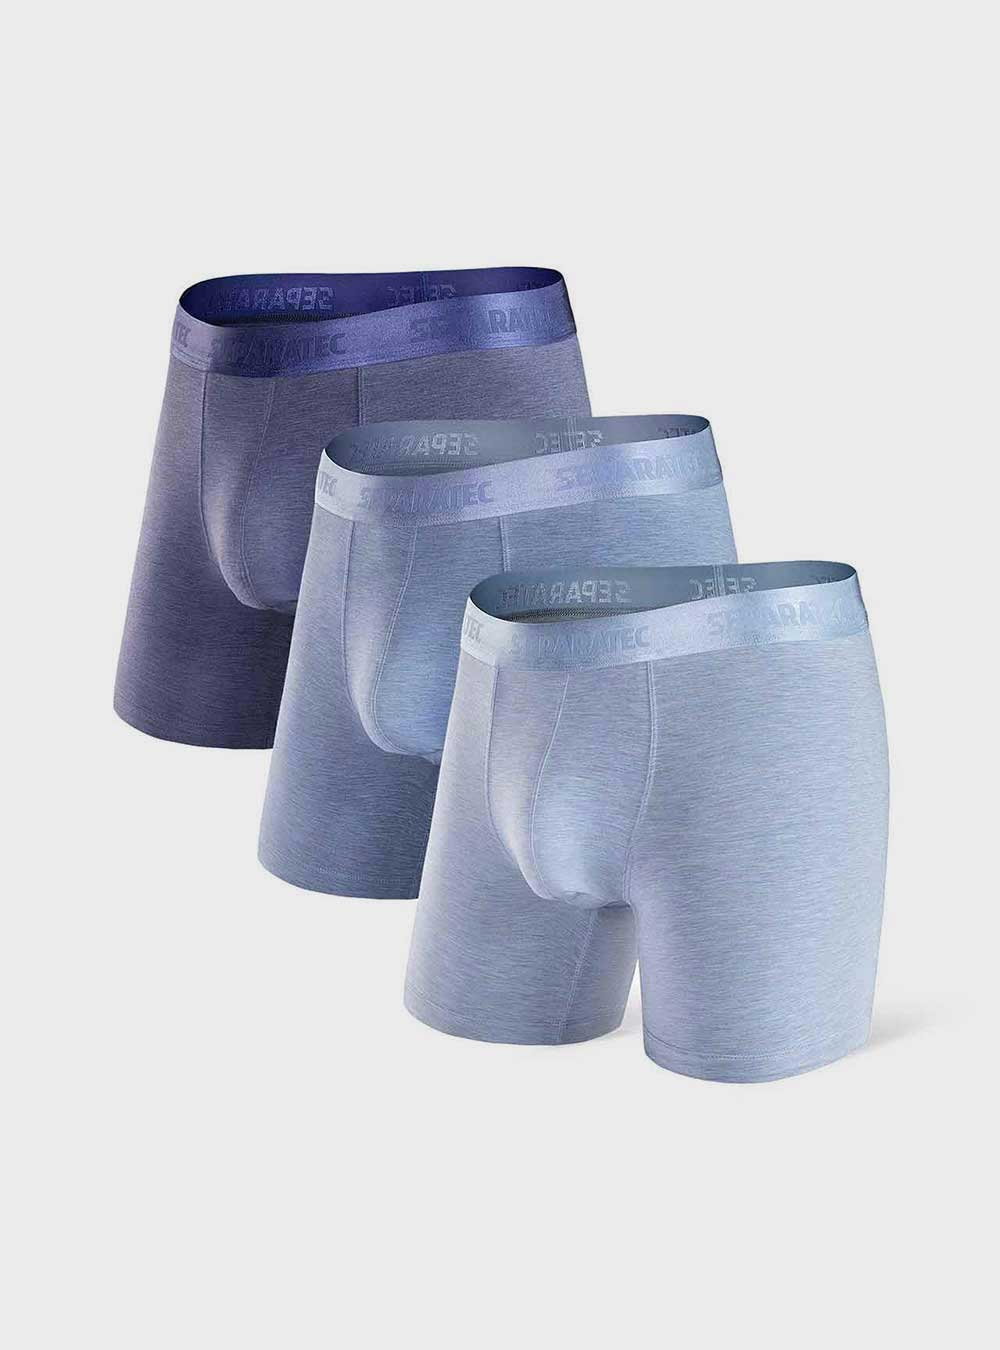 SuperSoft Micromodal Trunks 3 Pack